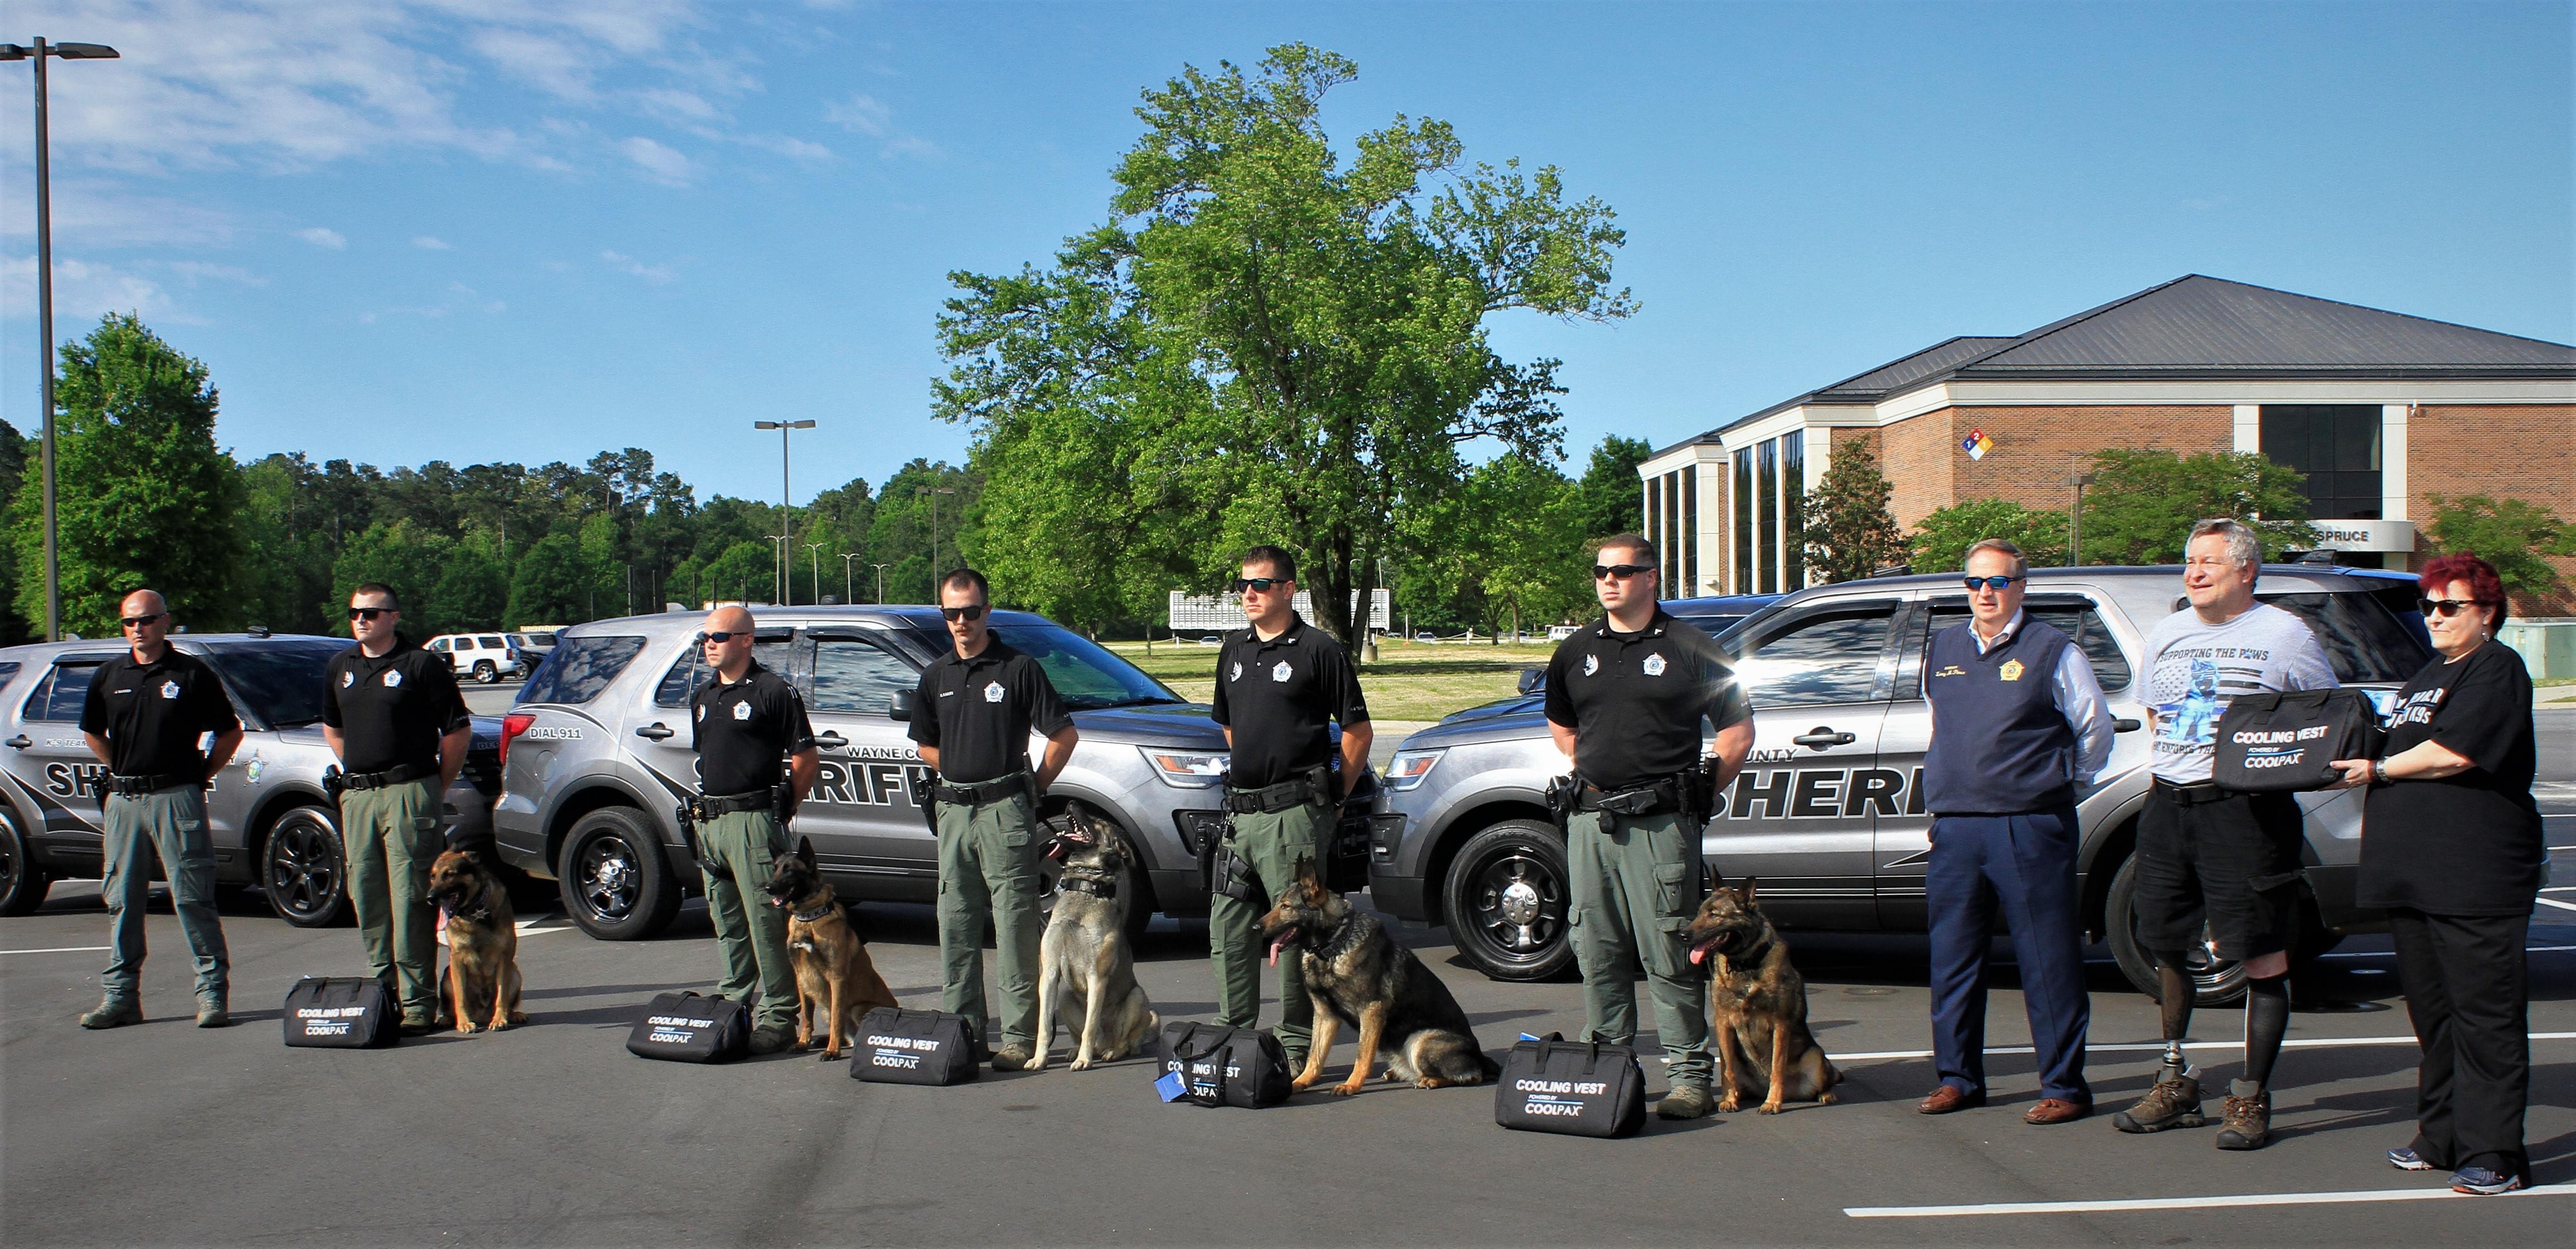 New Cooling Vests Donated To Sheriff’s K-9 Units (PHOTOS)